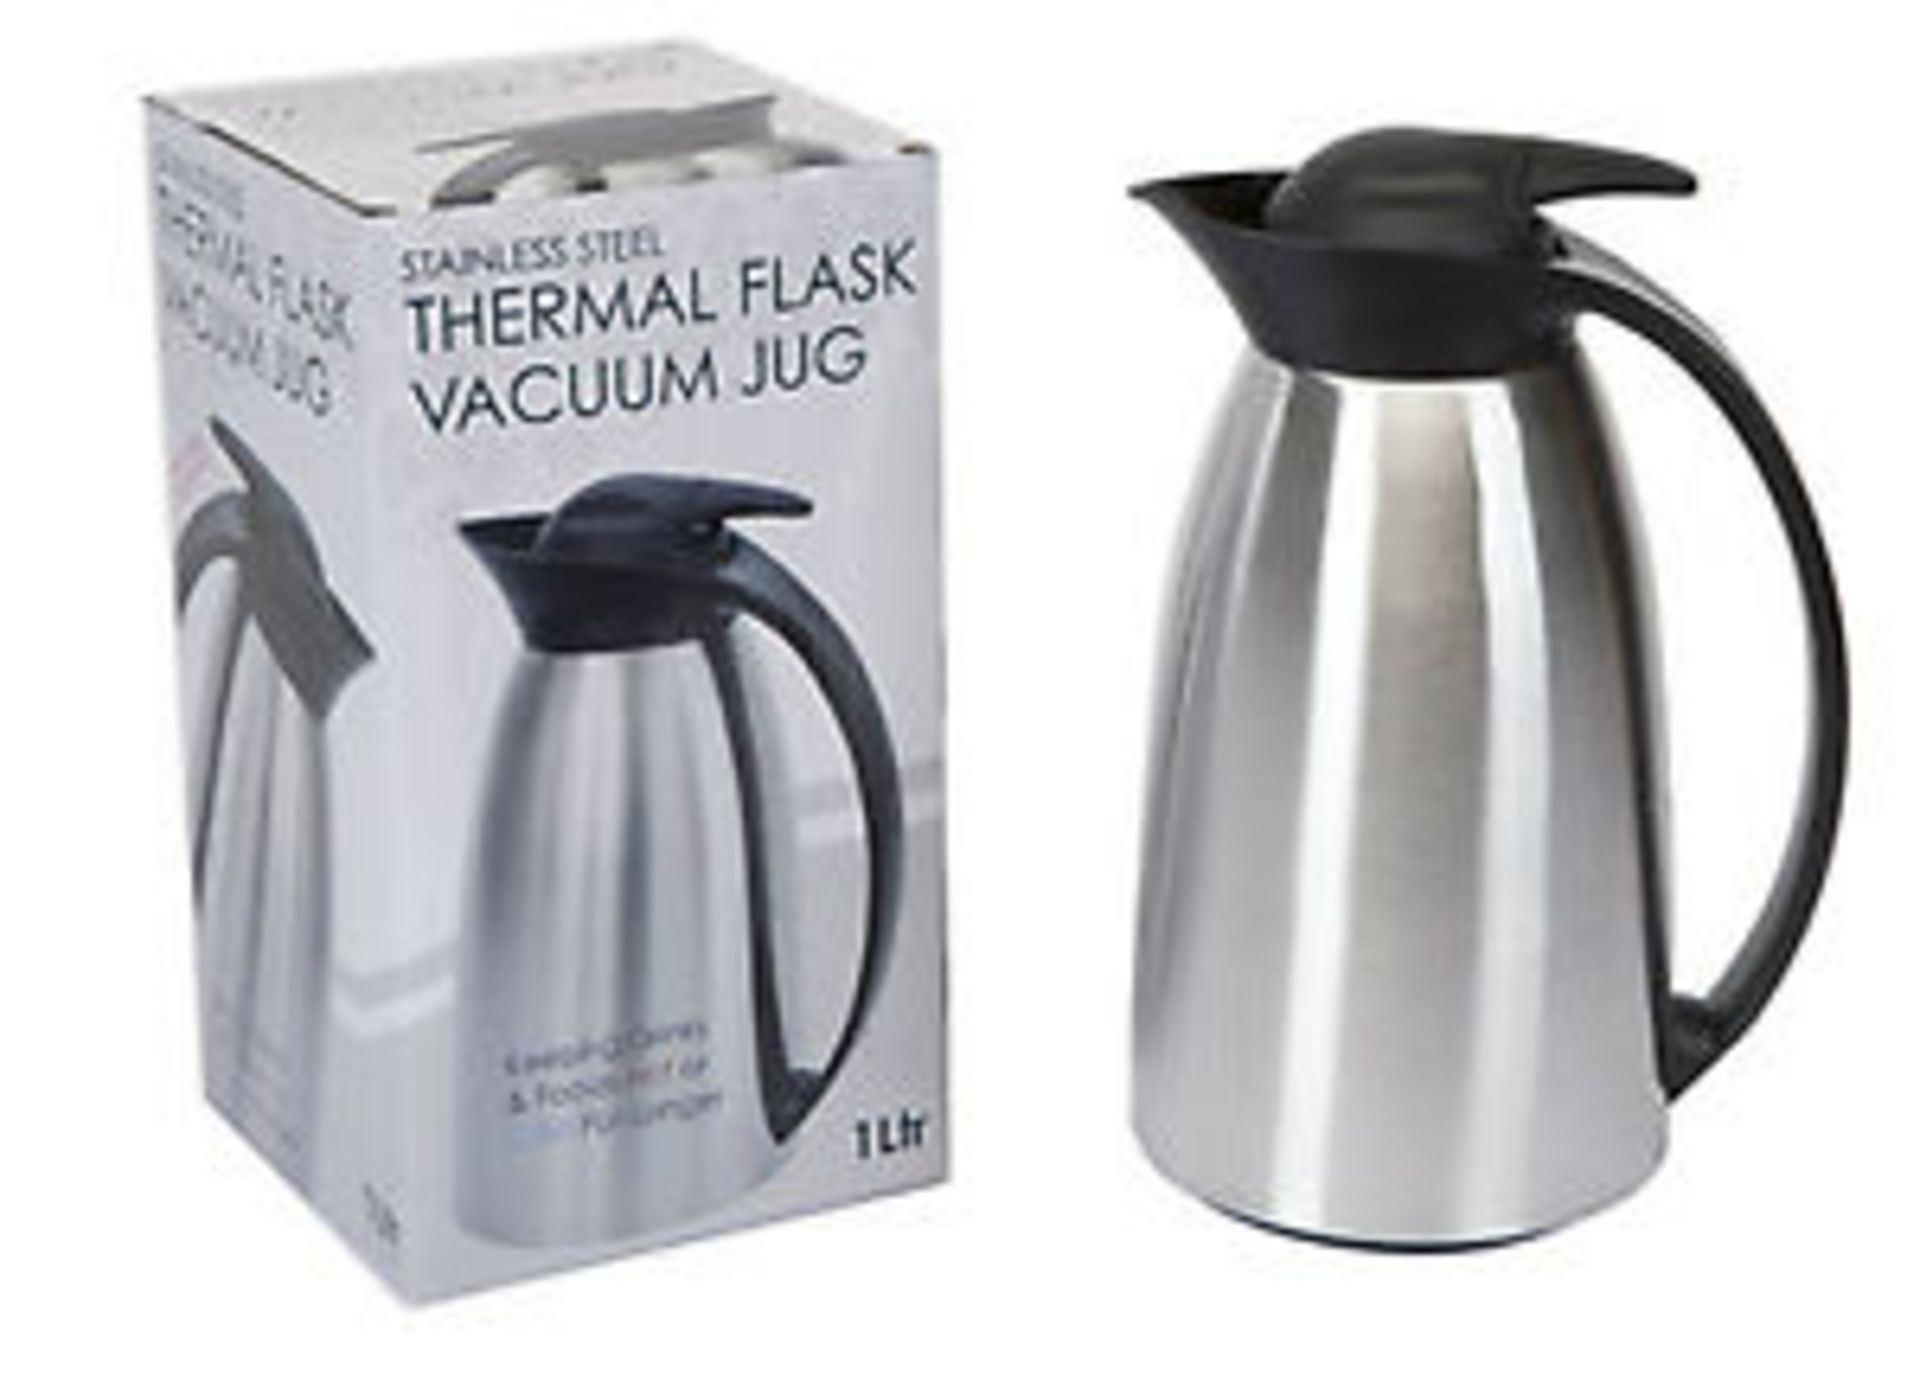 V Brand New 1 Litre Stainless Steel Thermal Flask Vacuum Jug - Keeps Drinks Hot or Cold For Much